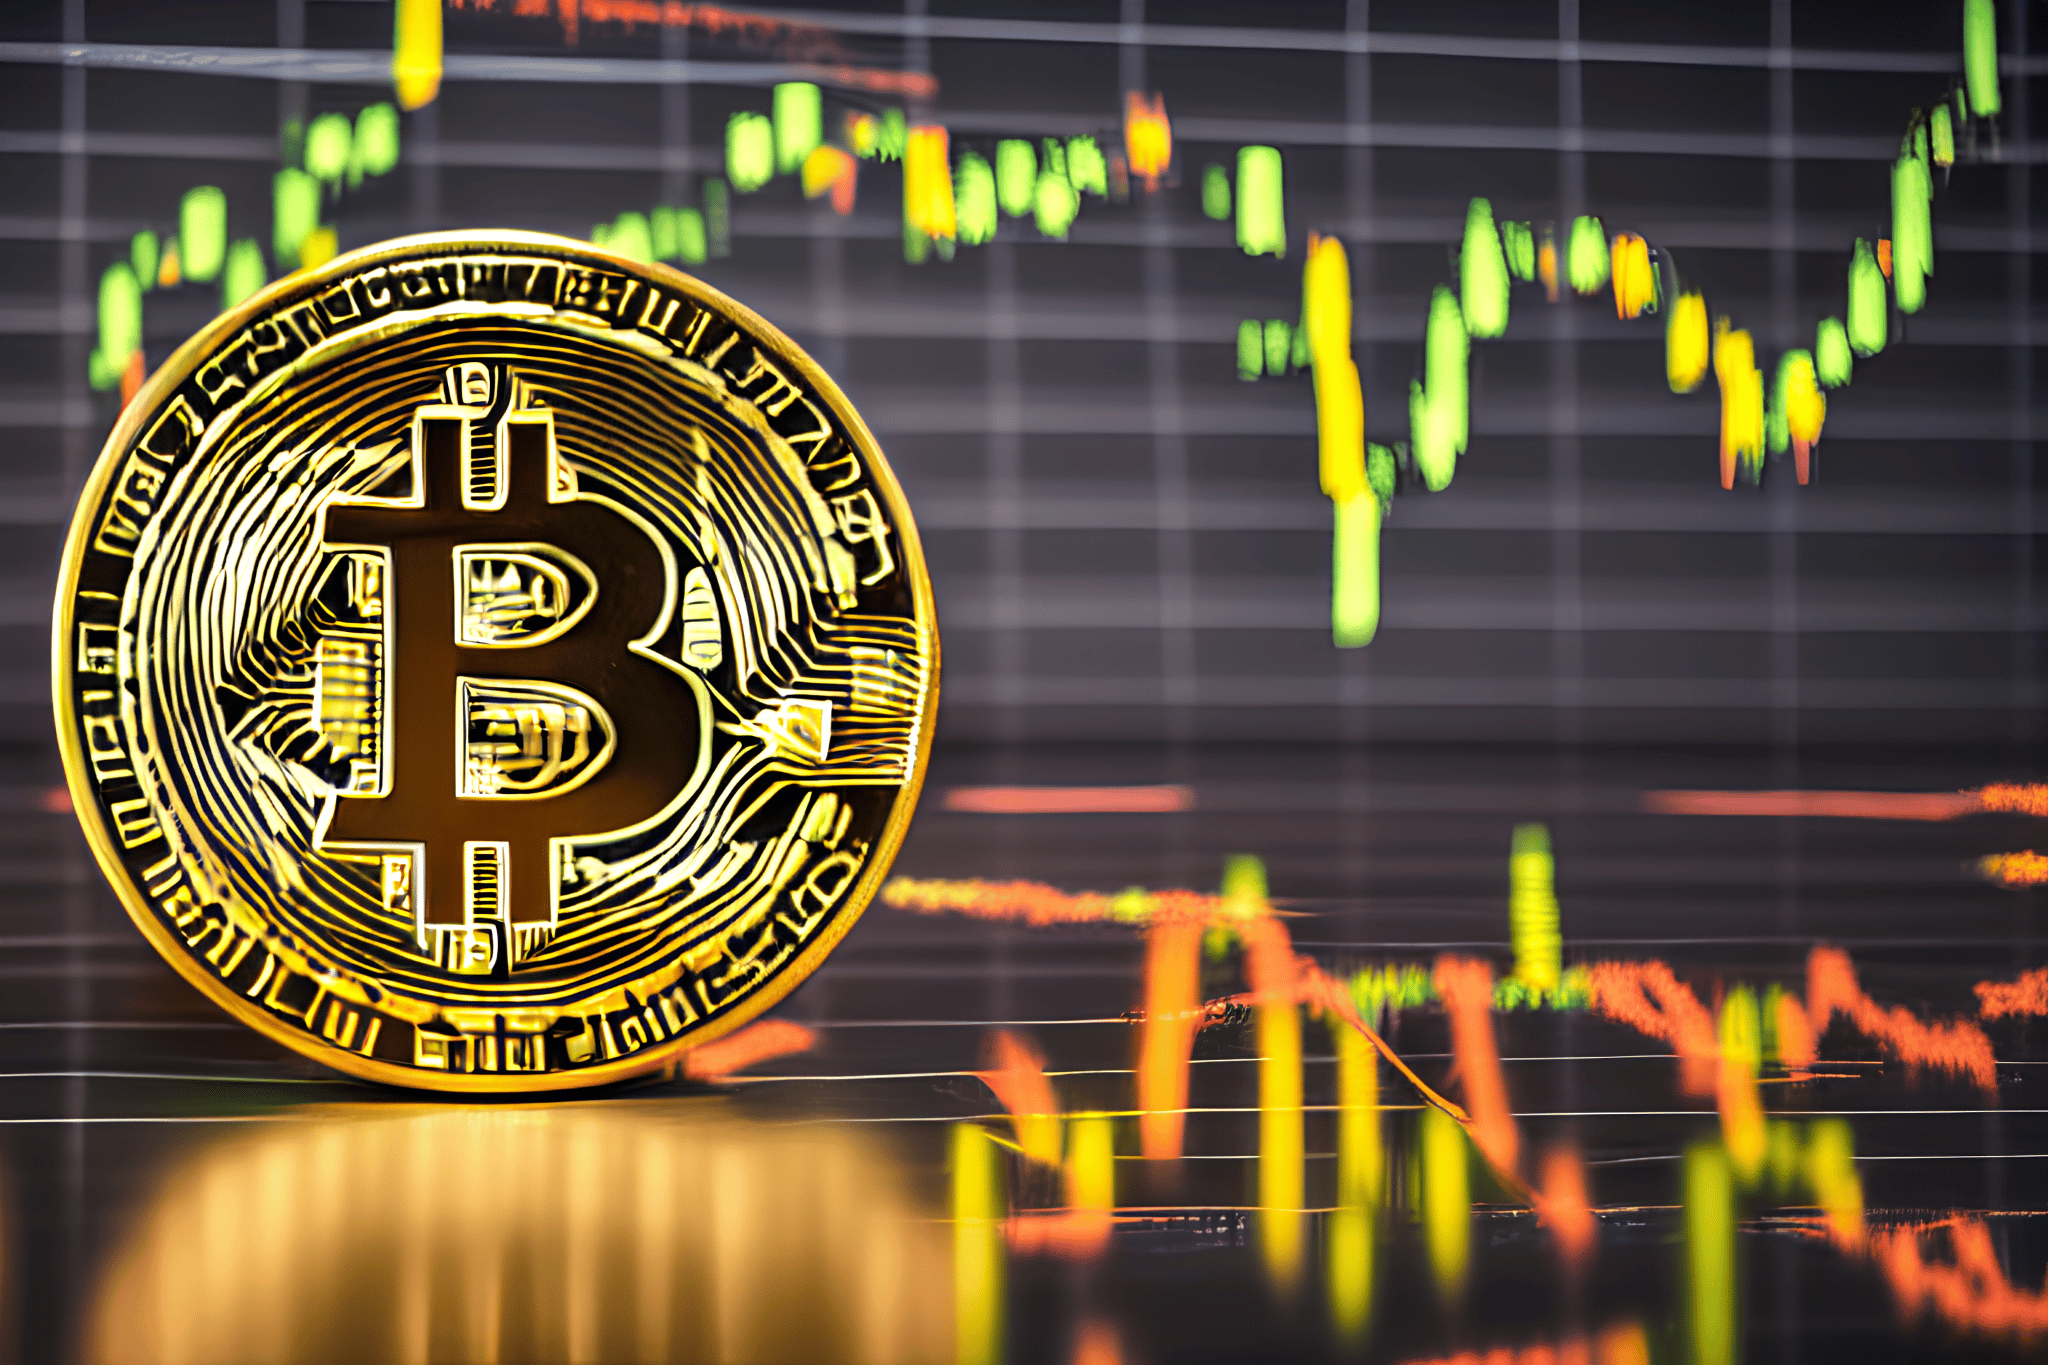 Bitcoin traders ‘buying the dip’ should know that the danger is…